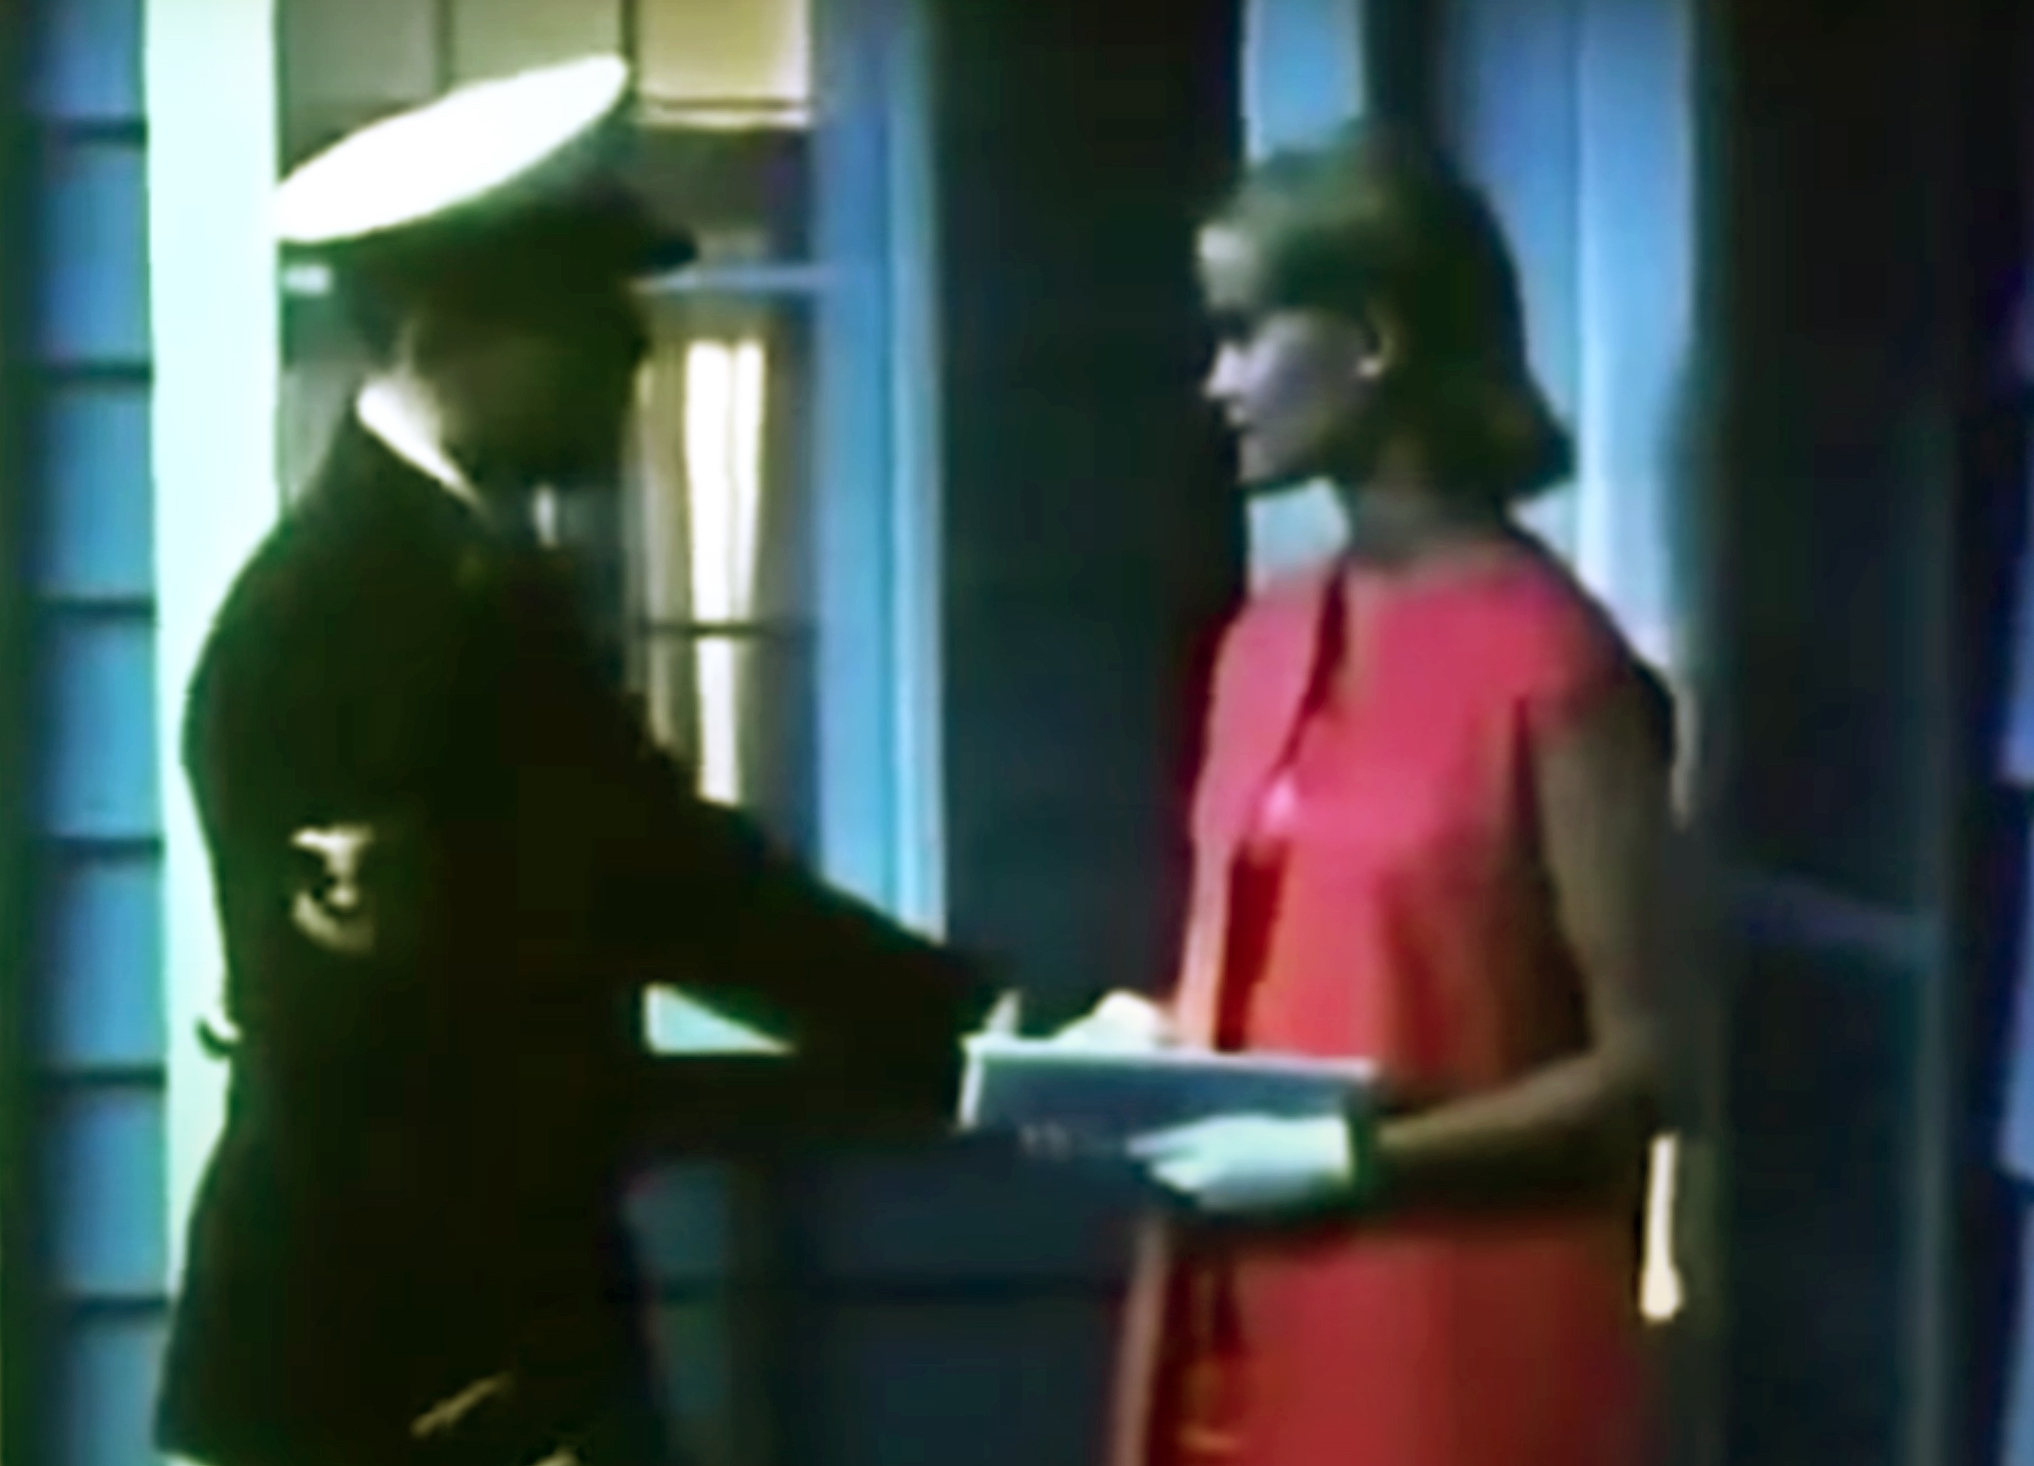 How to Date a Blond (According to the Navy in the 1960s)